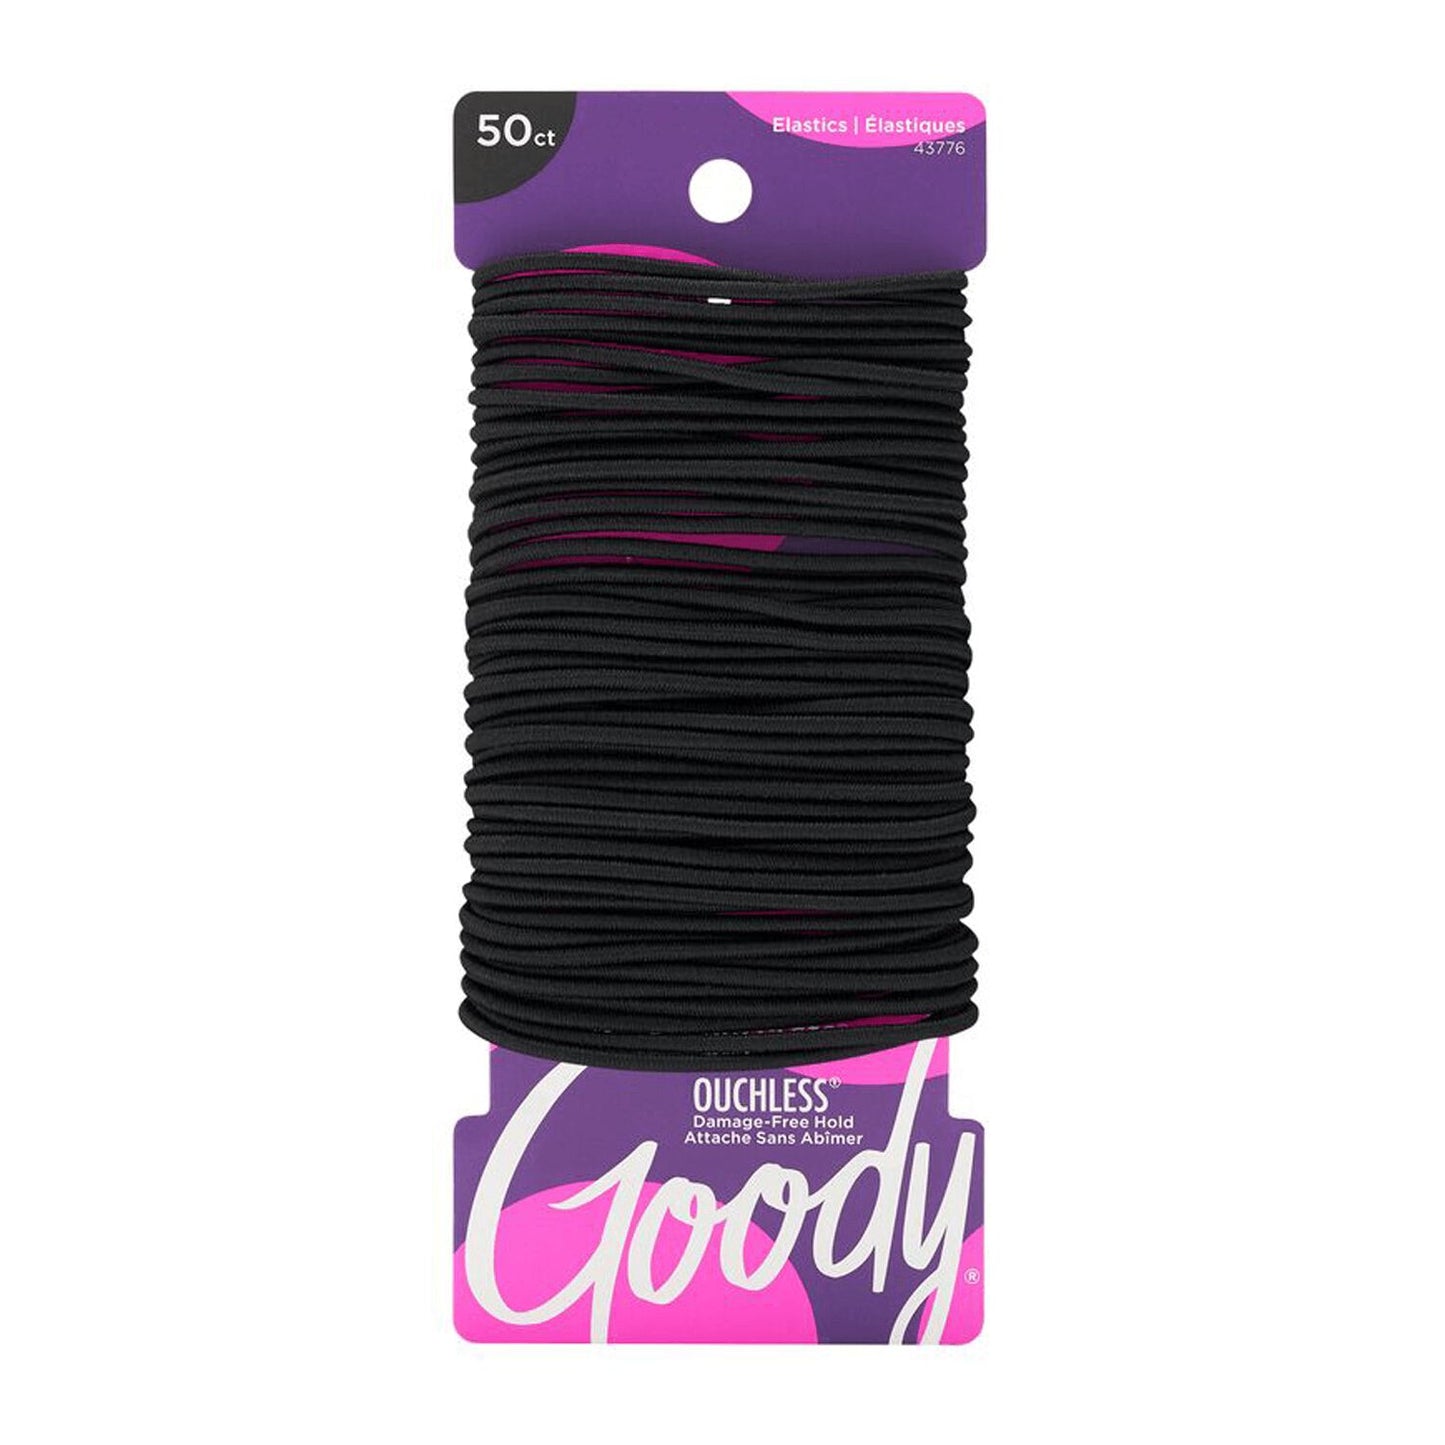 Goody Ouchless Large Thin Black Elastics 50 Count